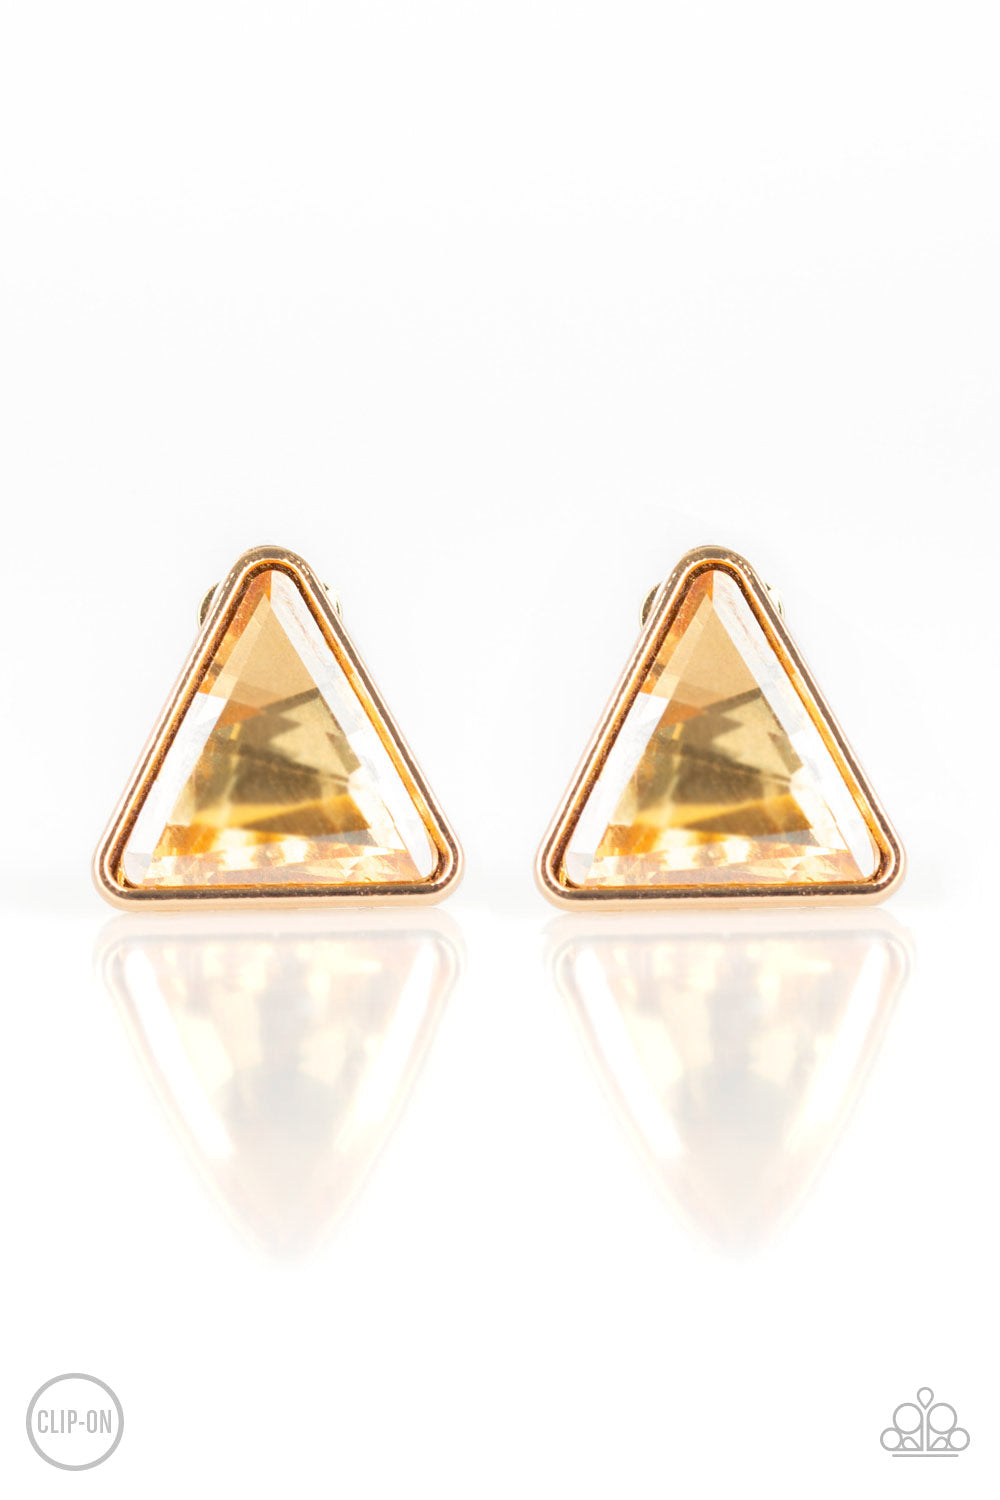 timeless-in-triangles-gold-p5co-gdxx-016xx